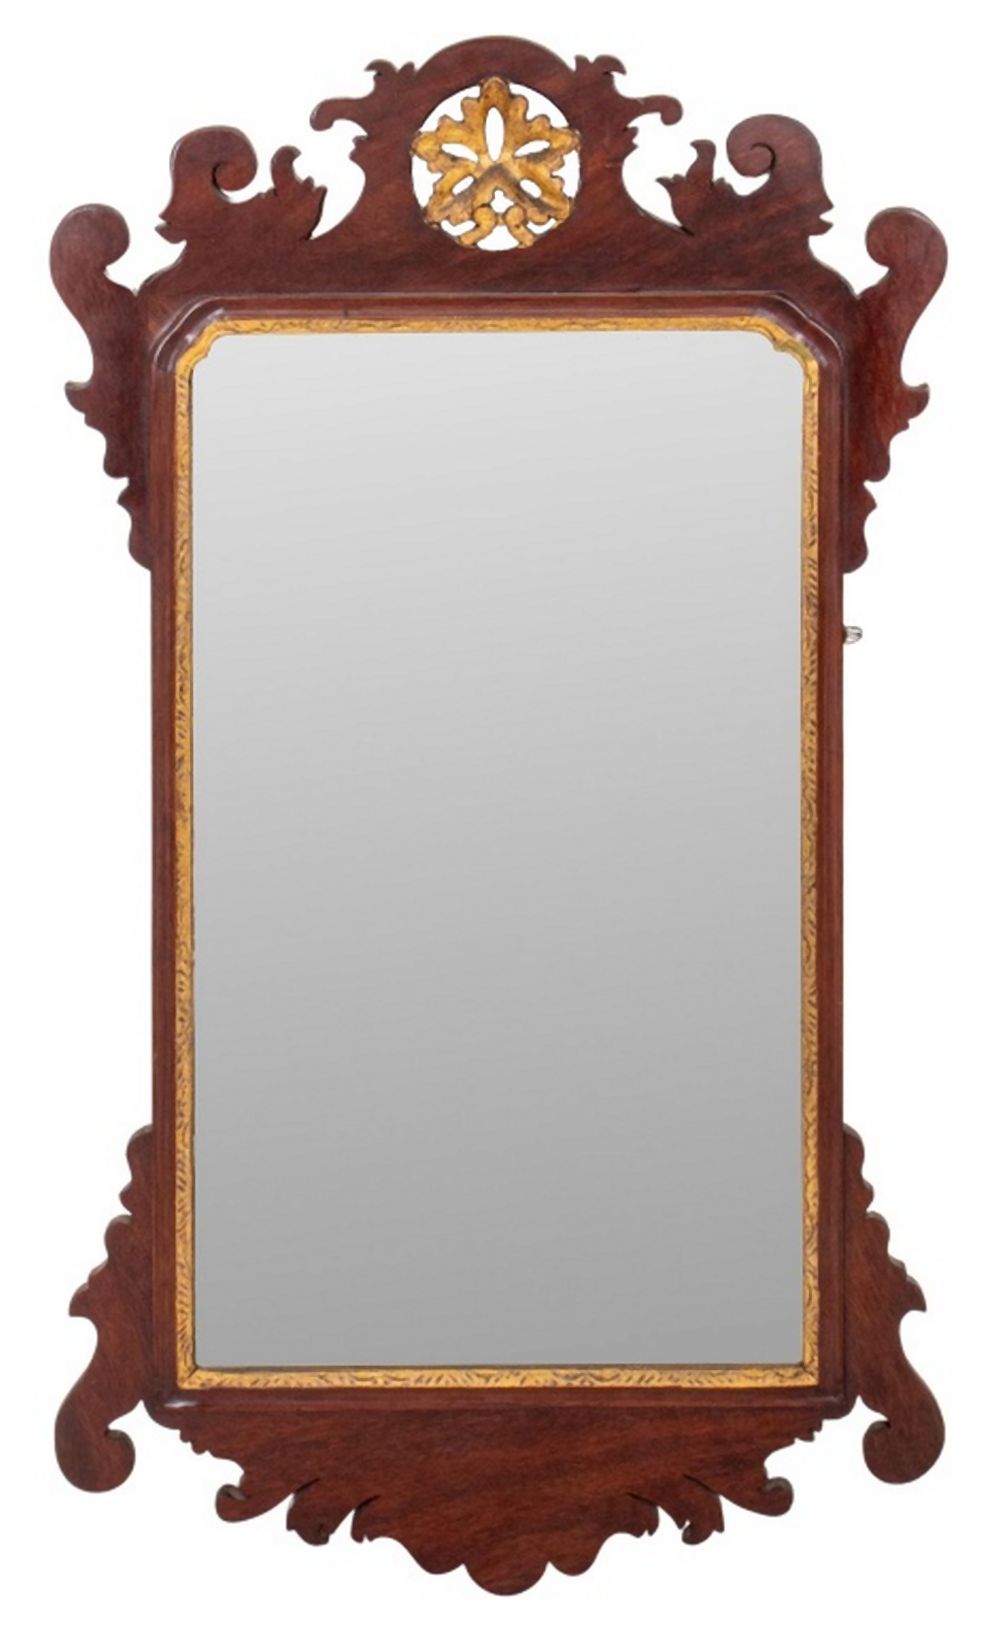 AMERICAN CHIPPENDALE STYLE MIRROR  3ce7fe